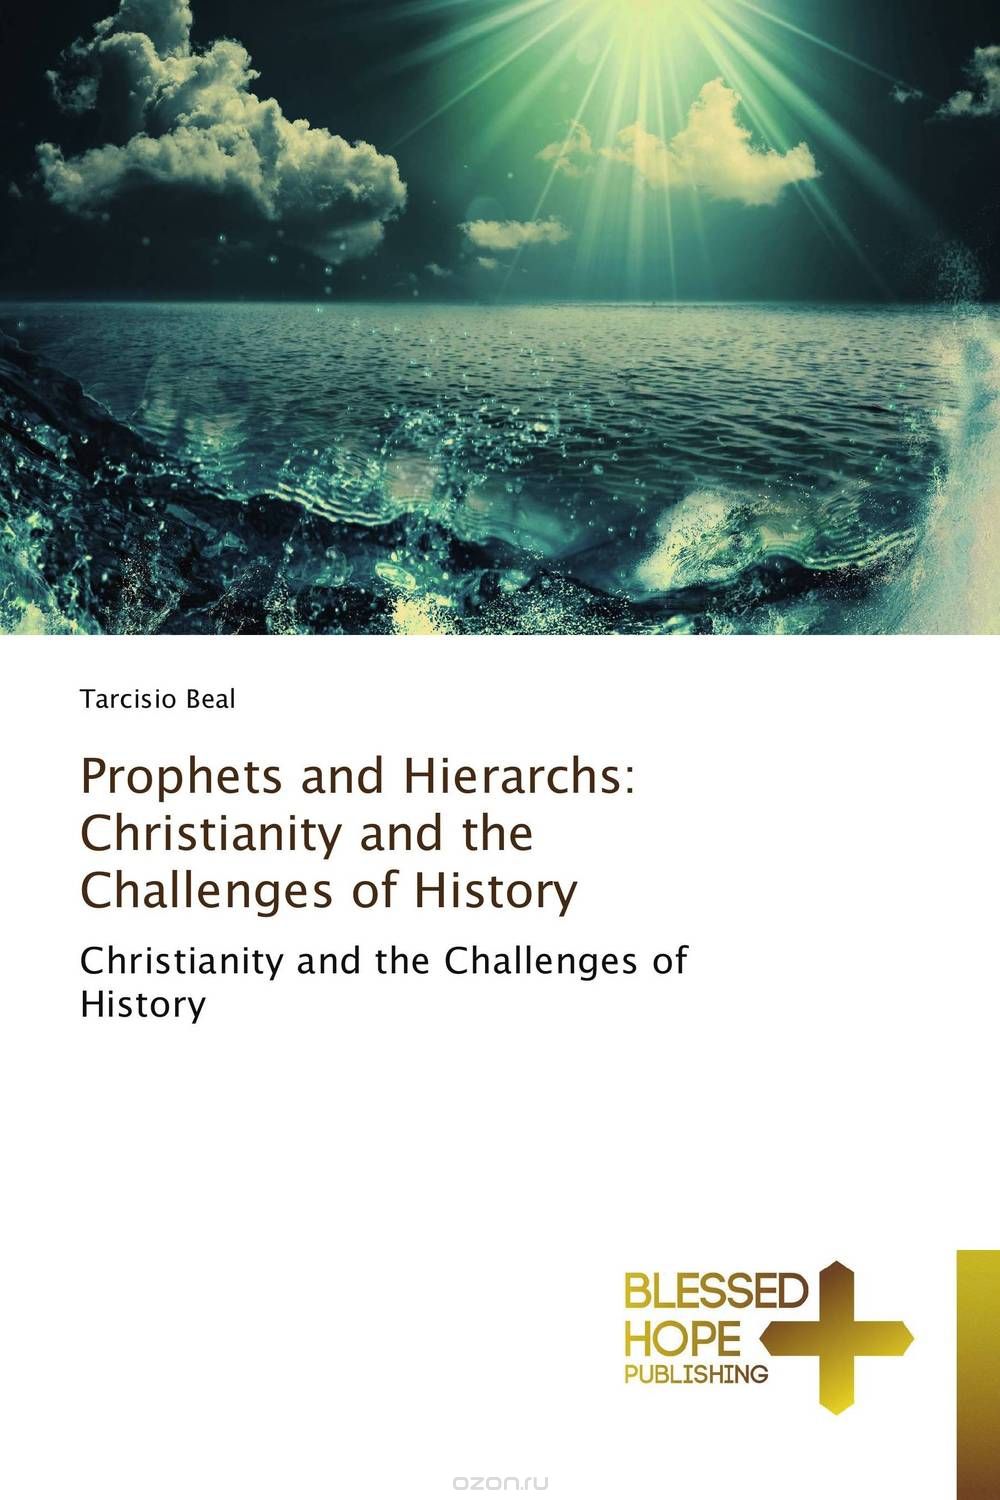 Скачать книгу "Prophets and Hierarchs: Christianity and the Challenges of History"